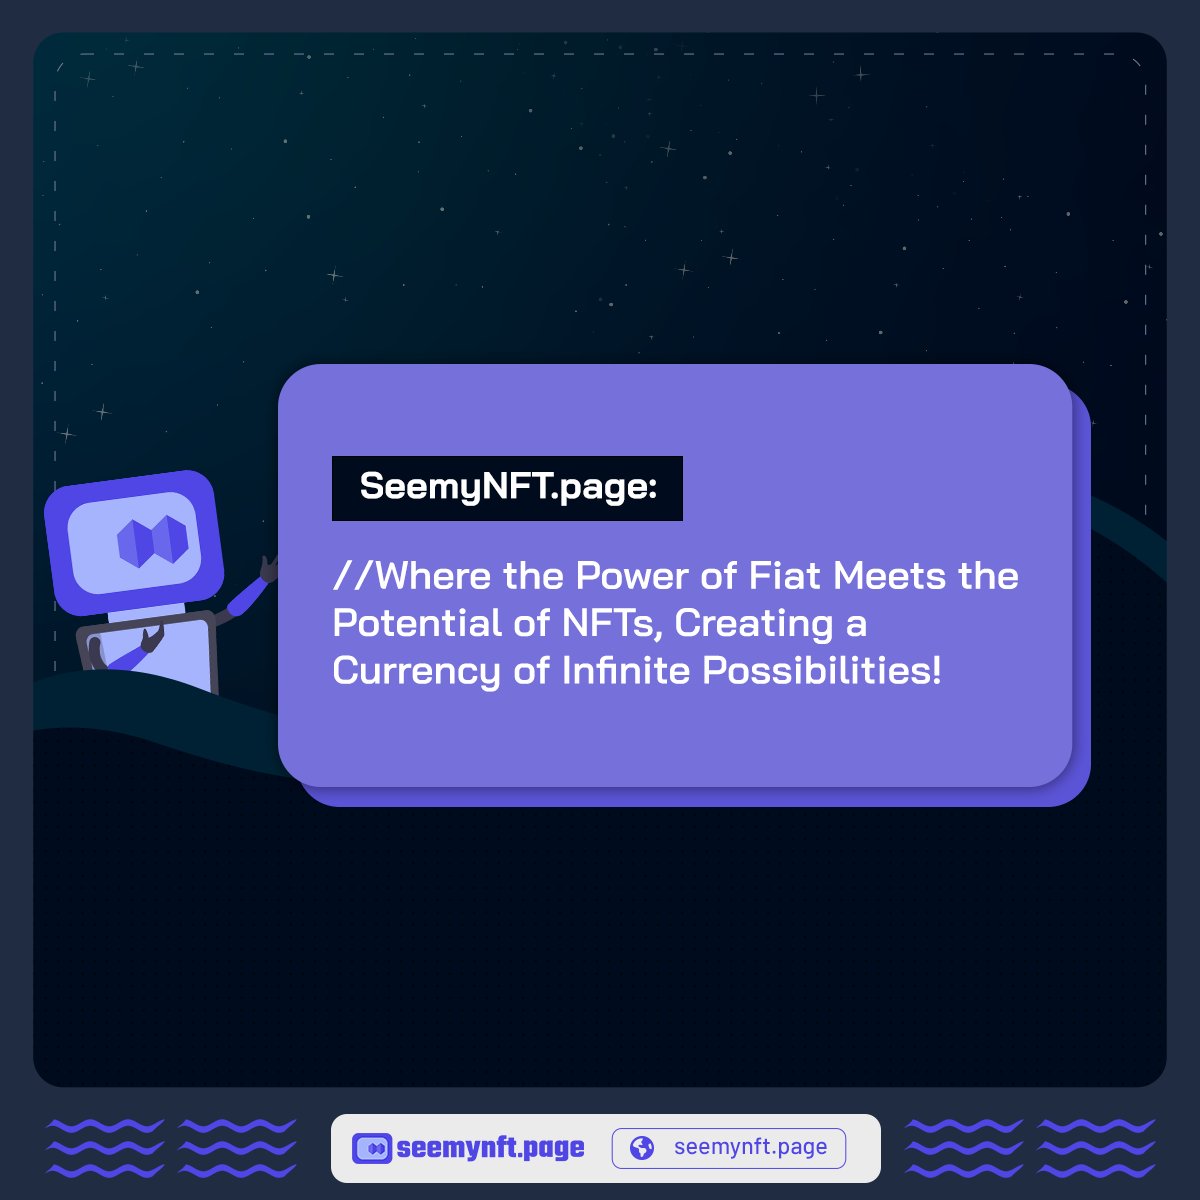 SeemyNFT.page: Merging Fiat's Power with NFT's Potential to Craft a Currency of Infinite Possibilities! 🌐💎 Learn more seemynft.page #SeemyNFT #FiatMeetsNFT #InfinitePossibilities